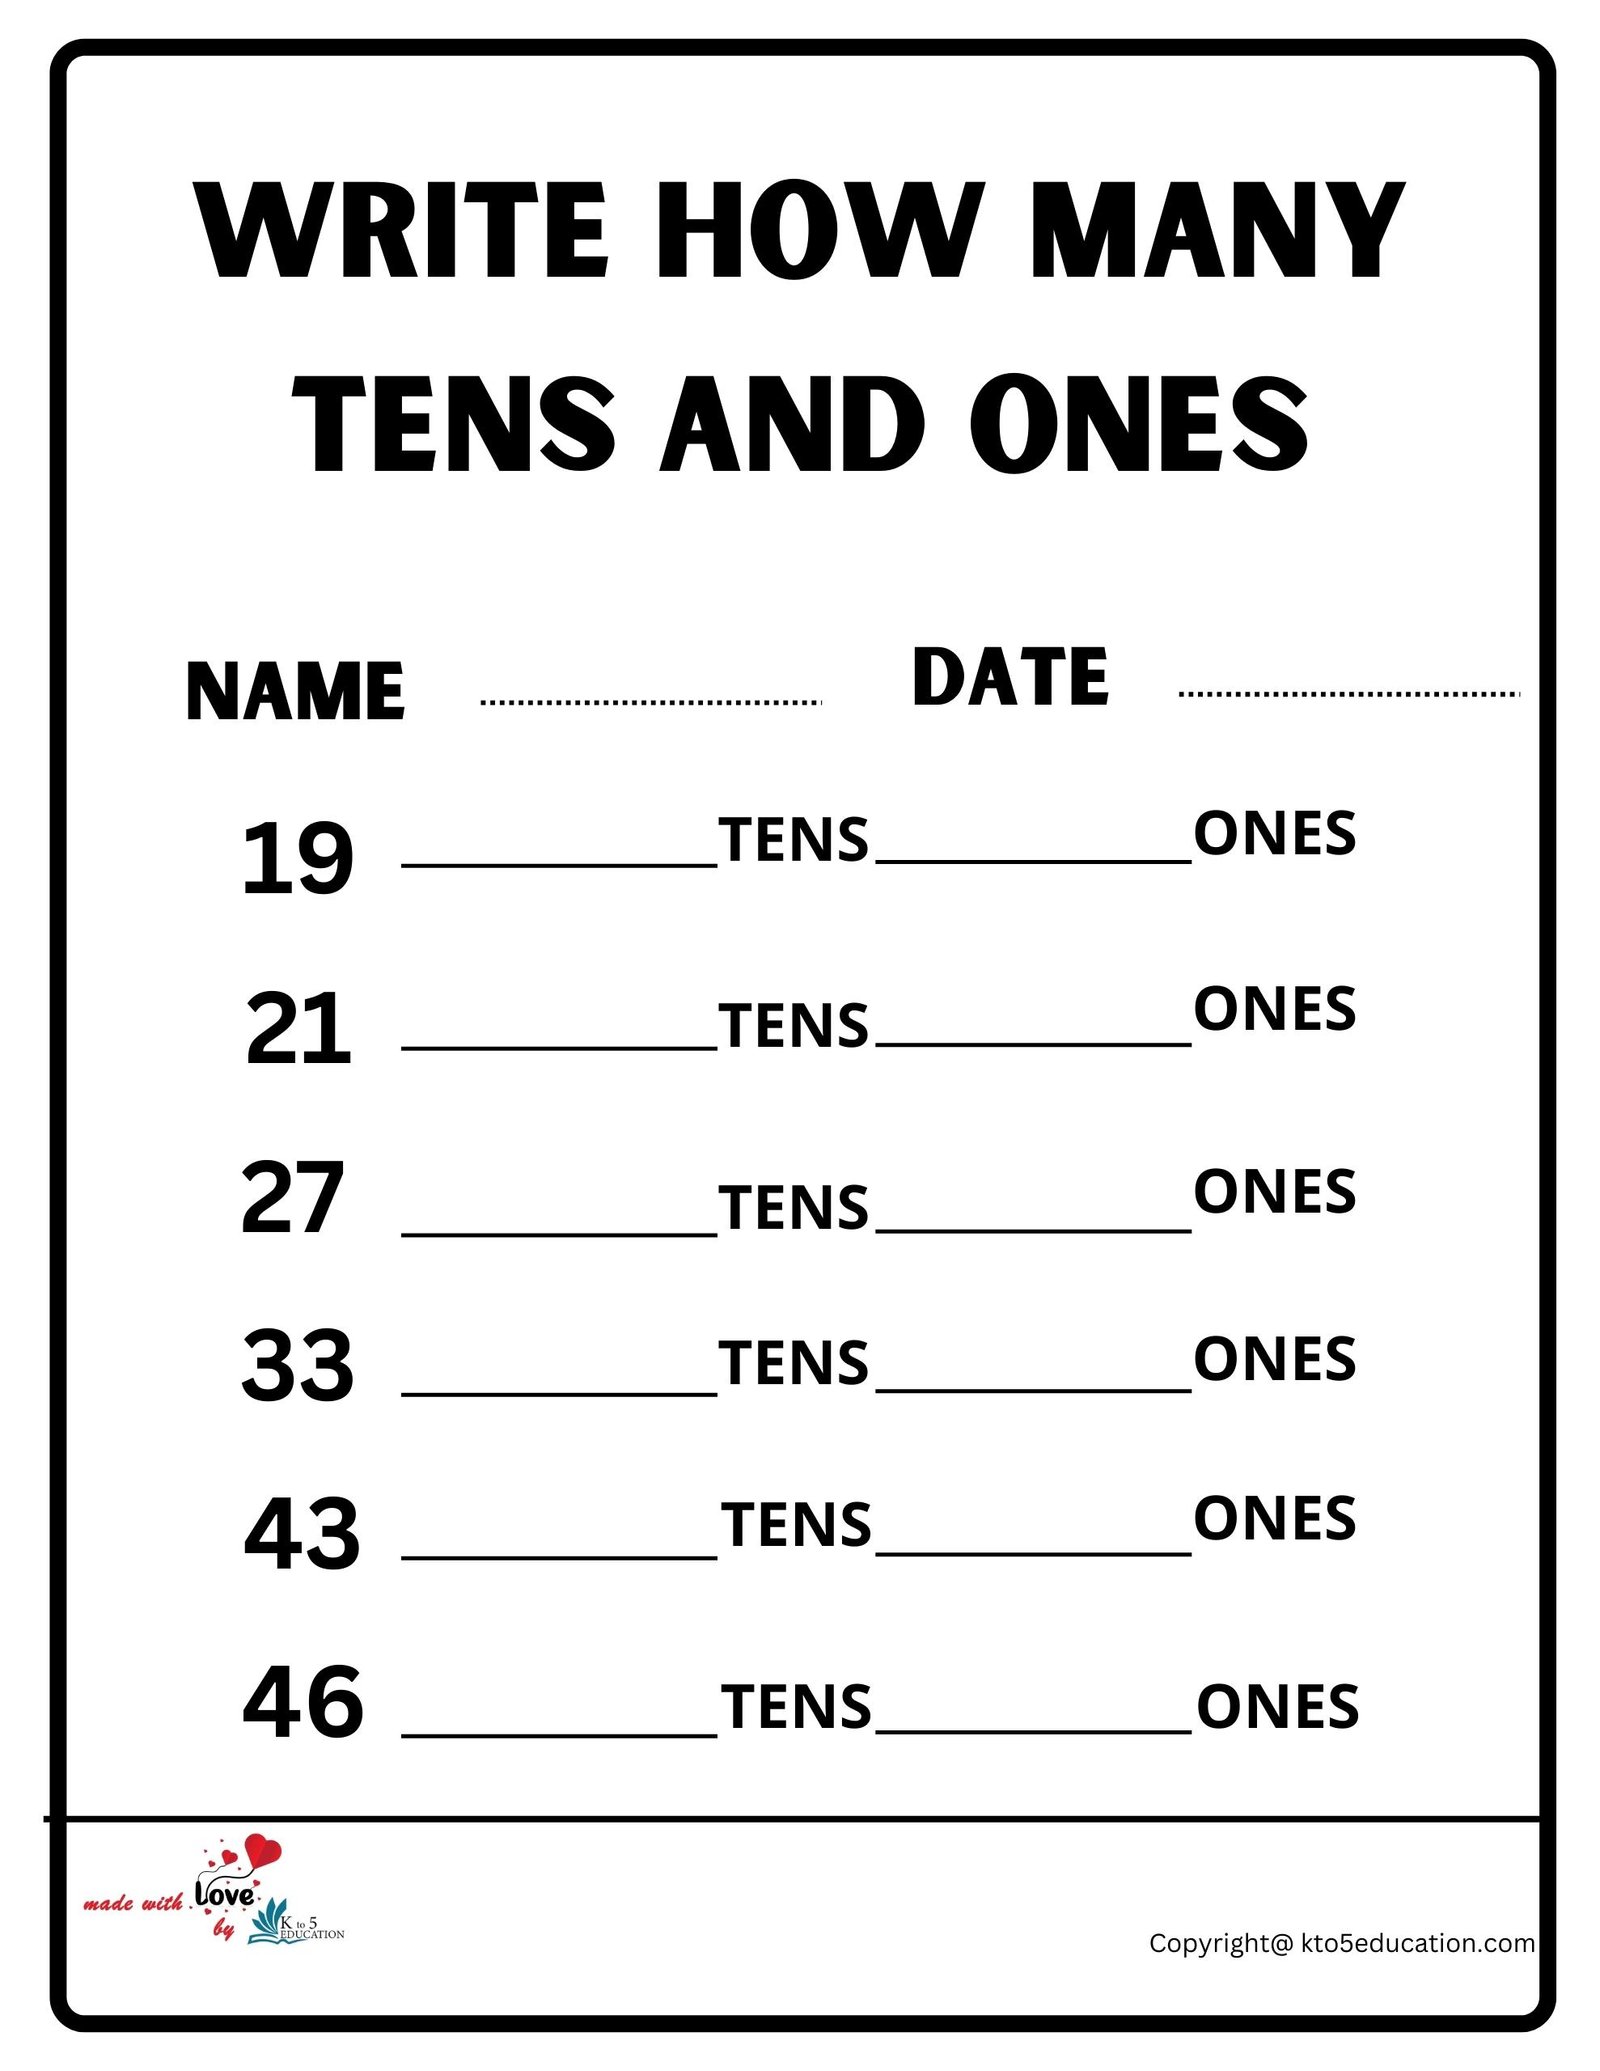 Write How Many Tens And Ones 2